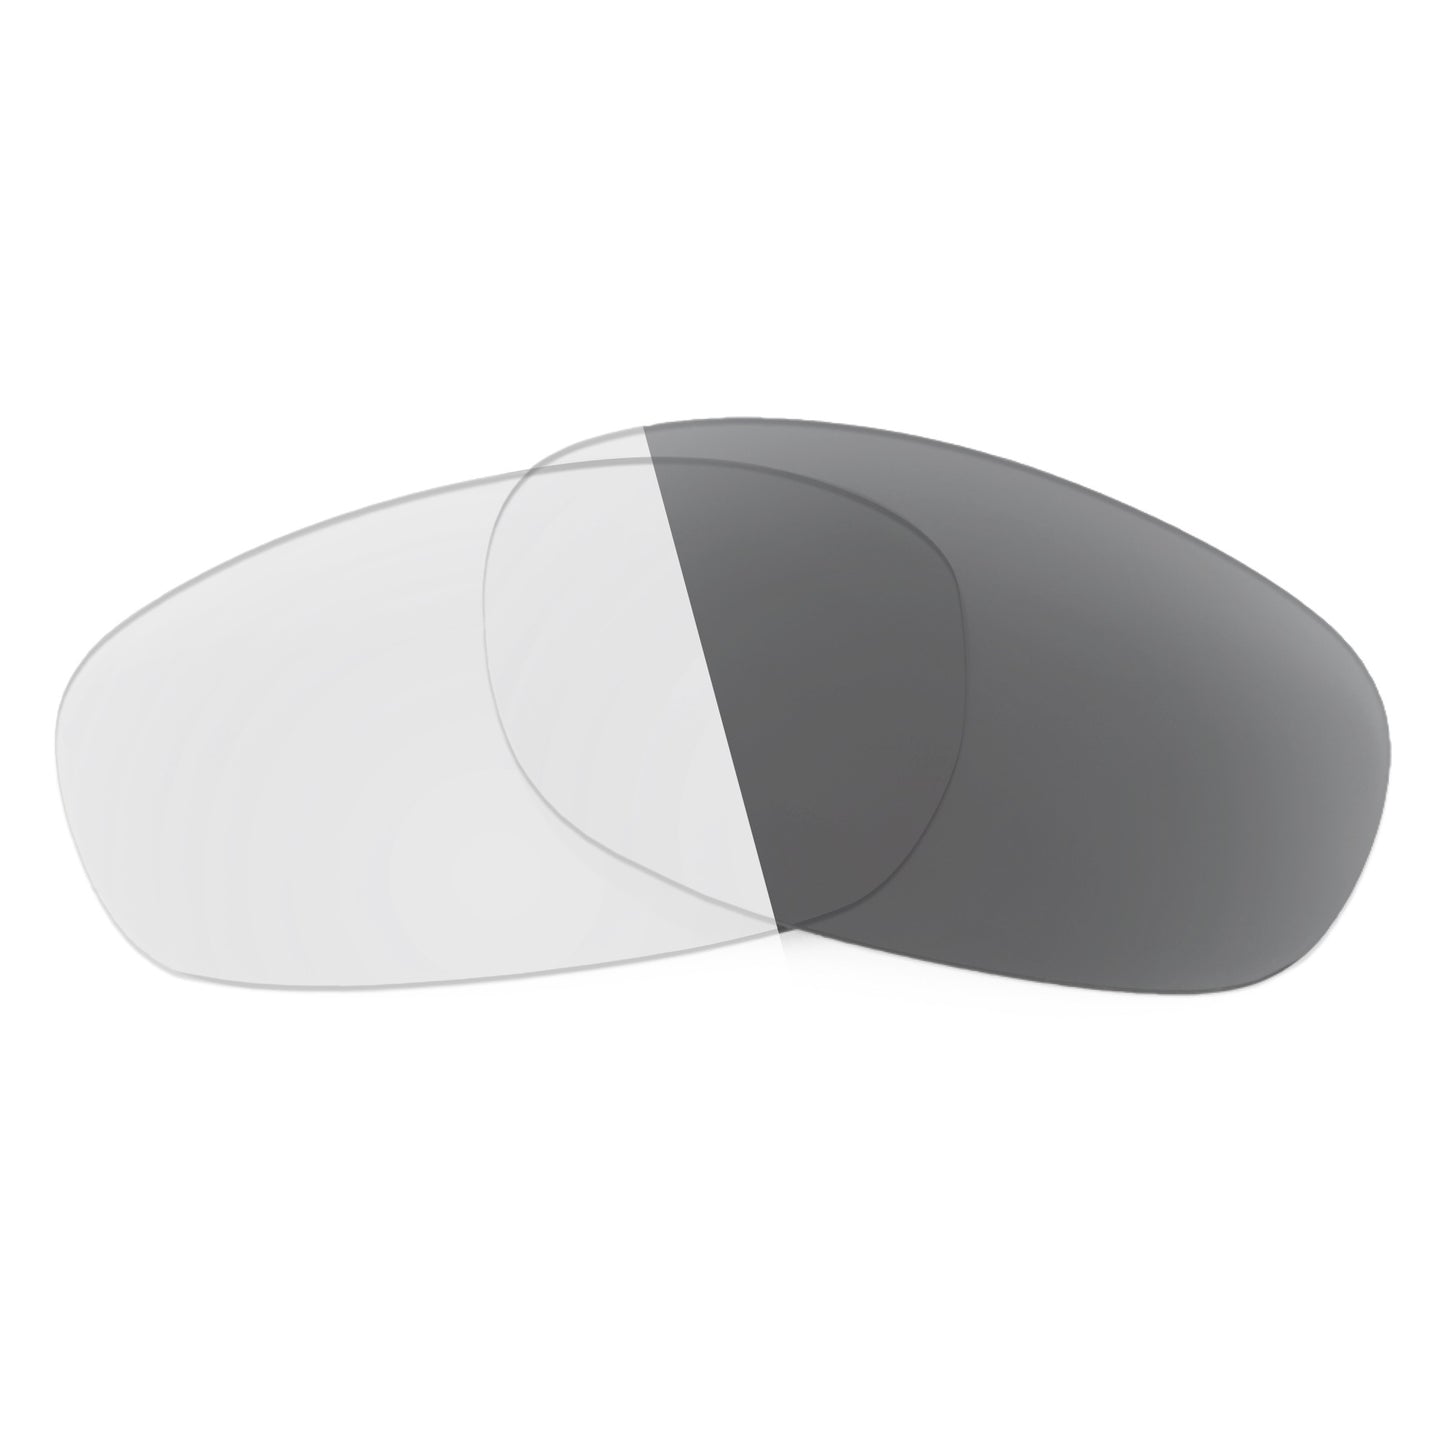 Revant replacement lenses for Ray-Ban RB4043 56mm Non-Polarized Adapt Gray Photochromic